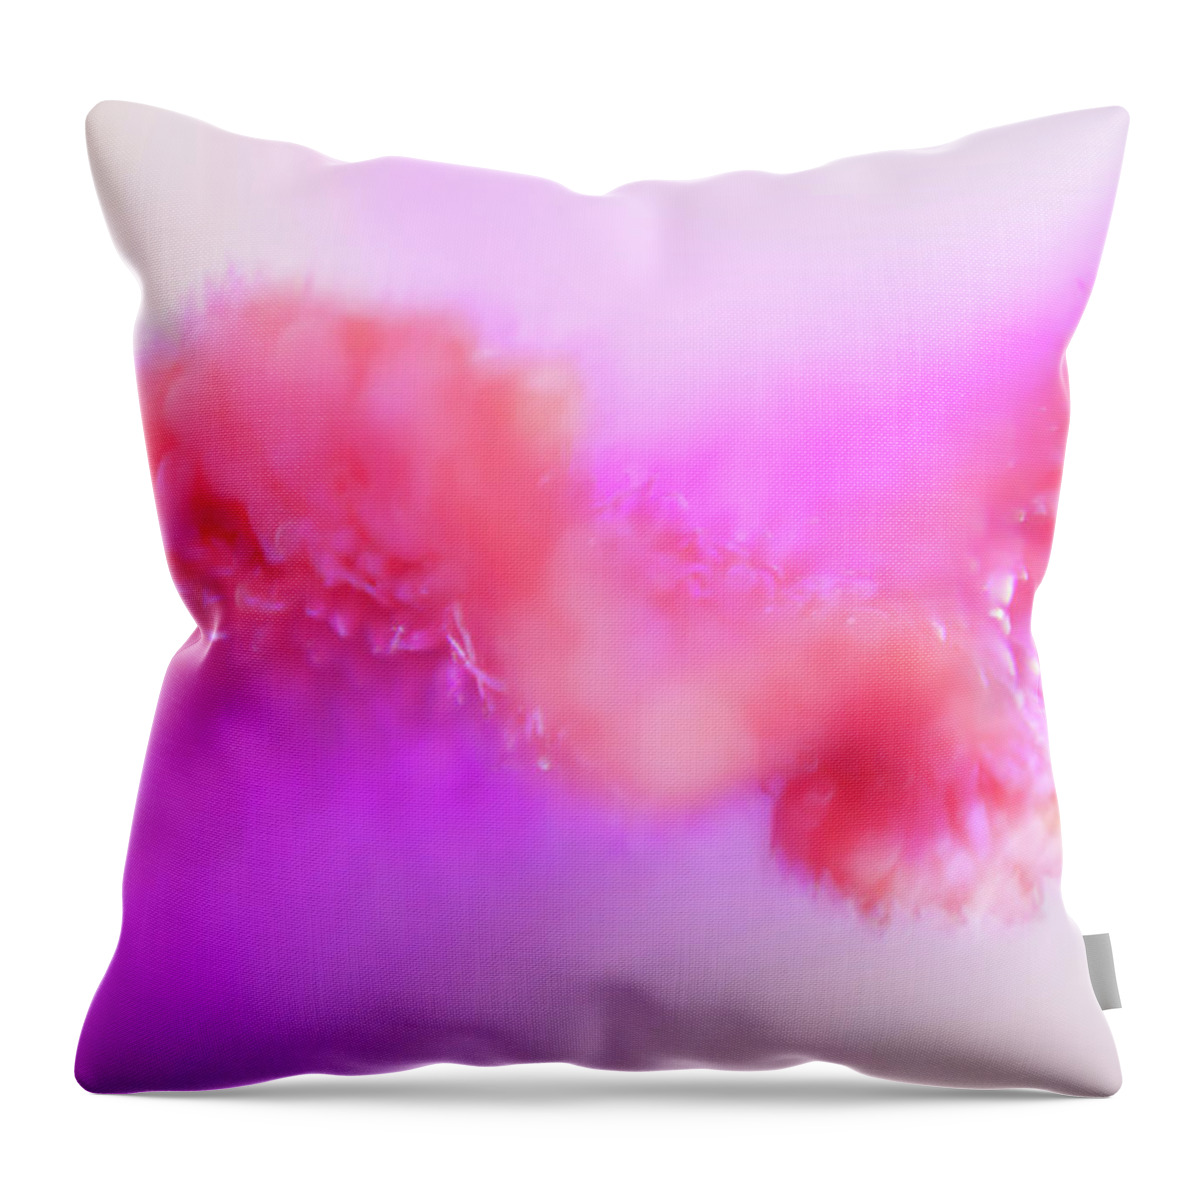 Concepts & Topics Throw Pillow featuring the digital art Multicolored Abstract Pattern by Ralf Hiemisch